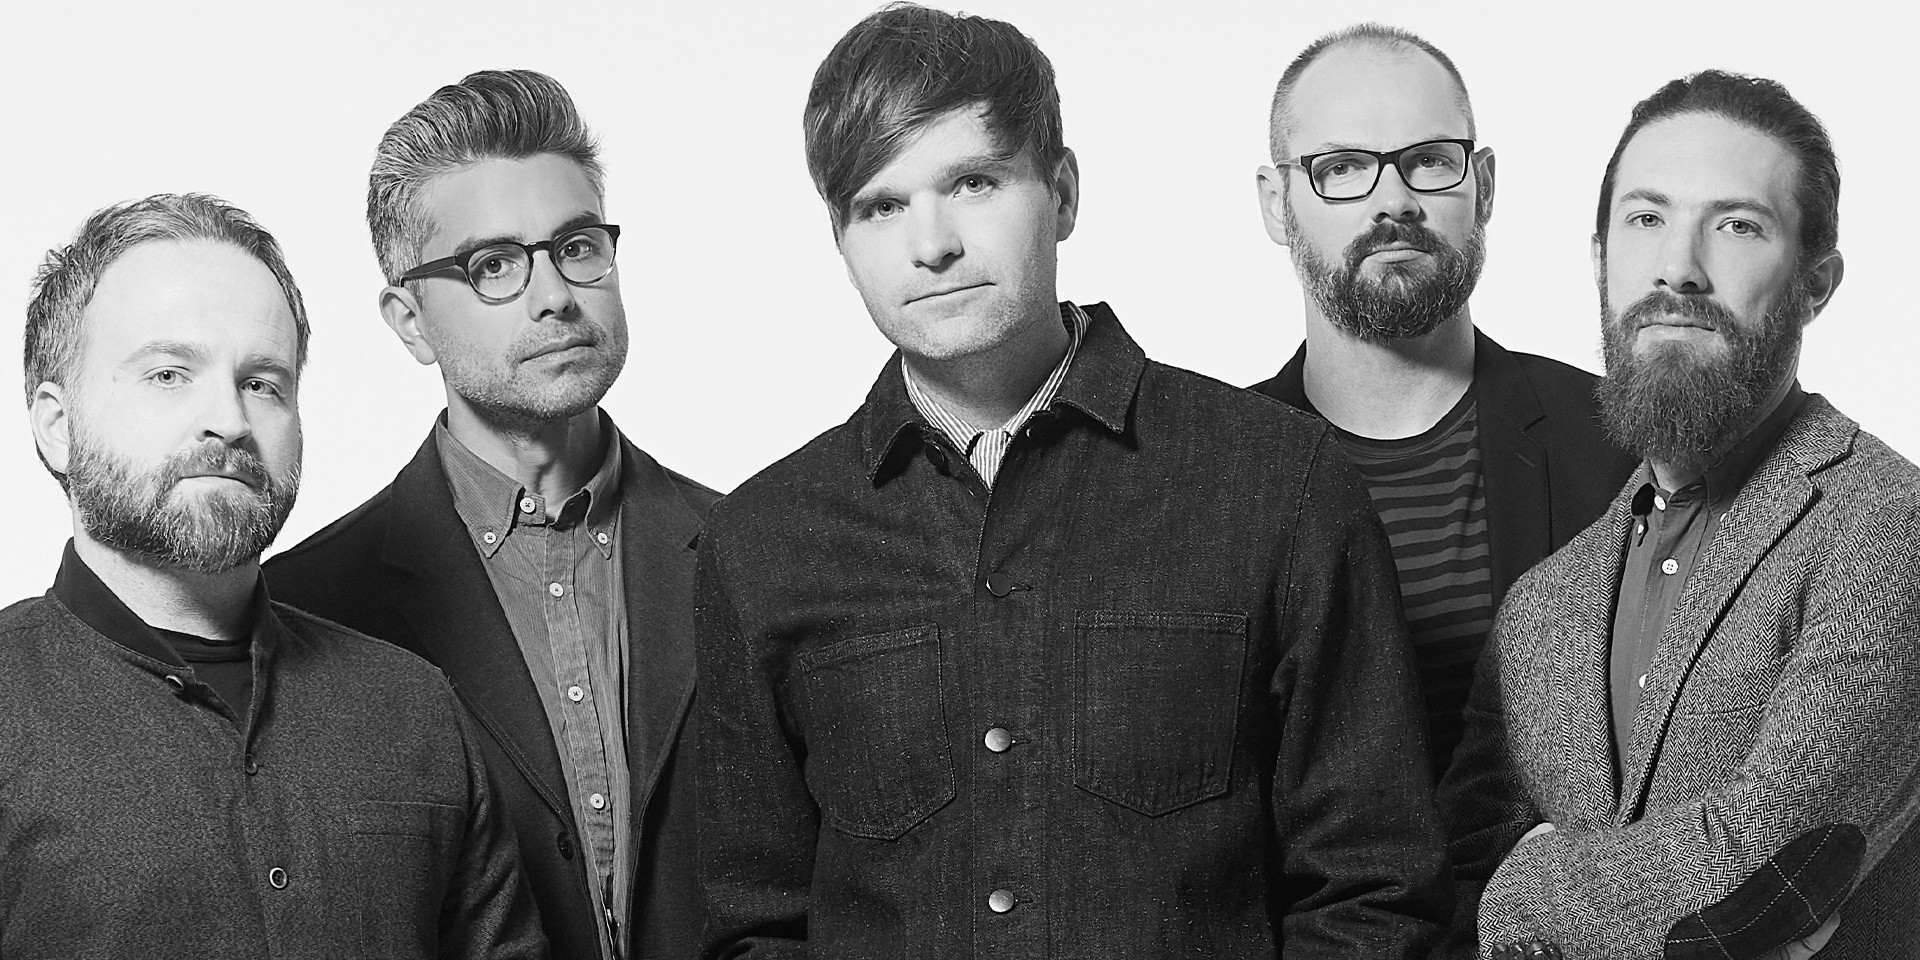 Death Cab for Cutie celebrate 15th anniversary of Plans with new video album – watch